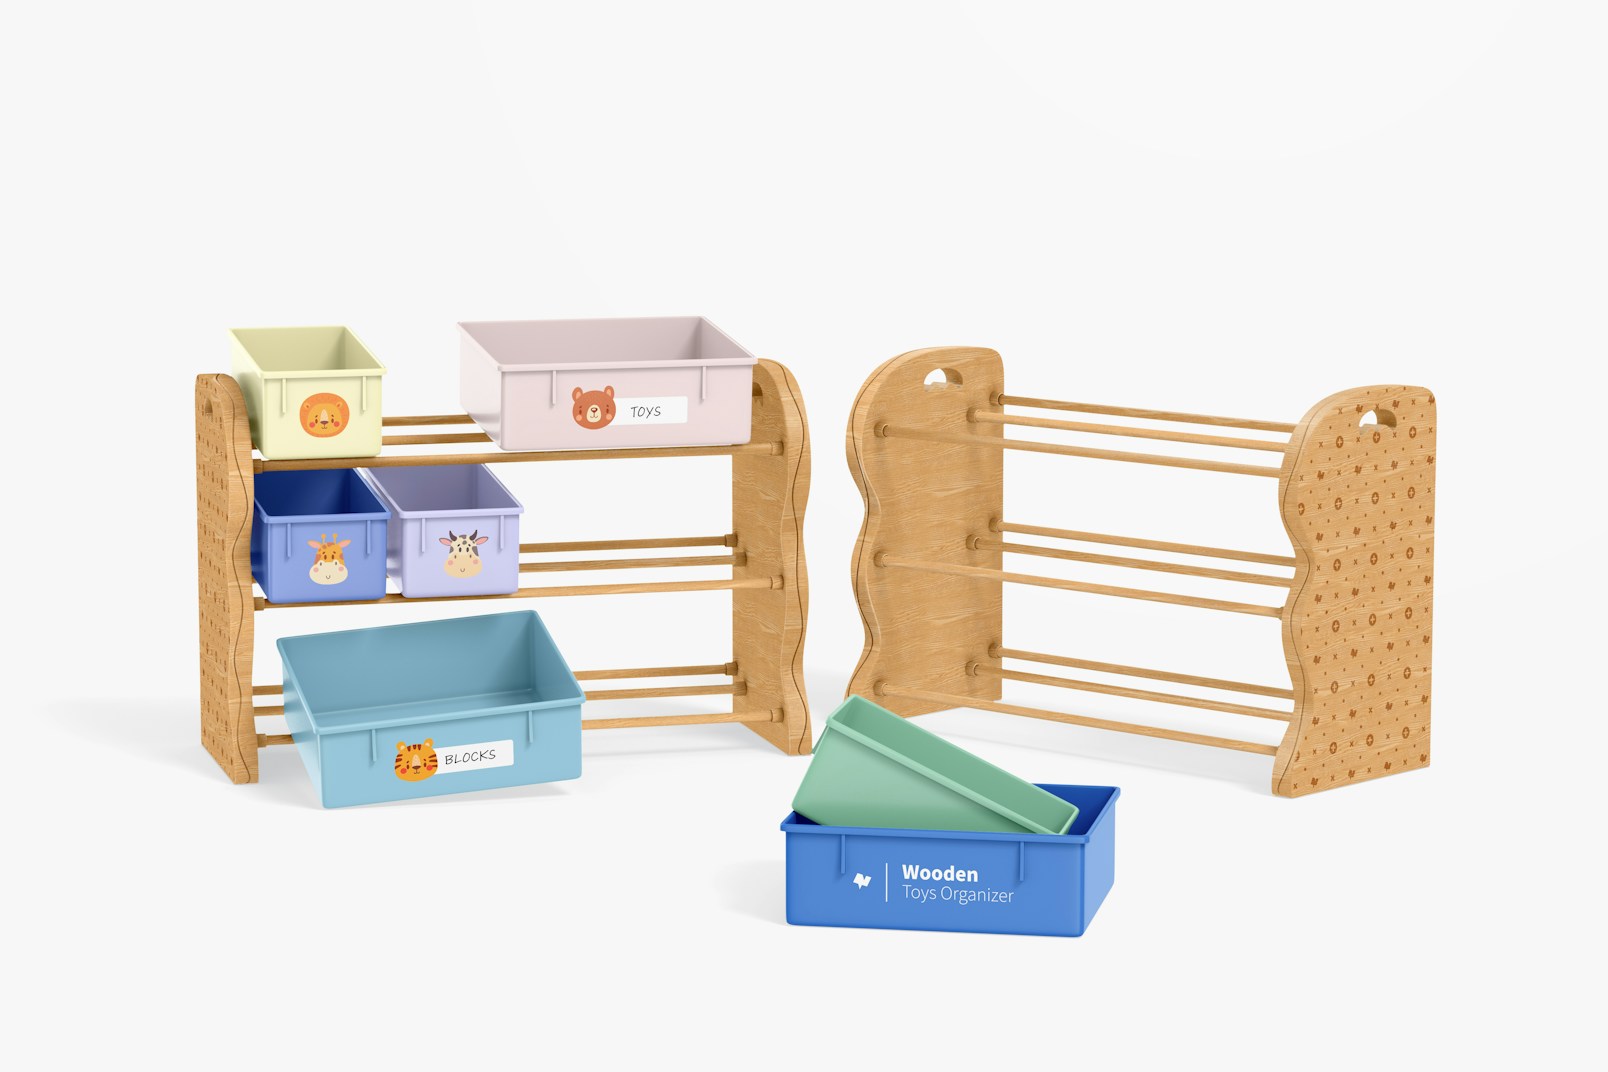 Wooden Toys Organizers Mockup